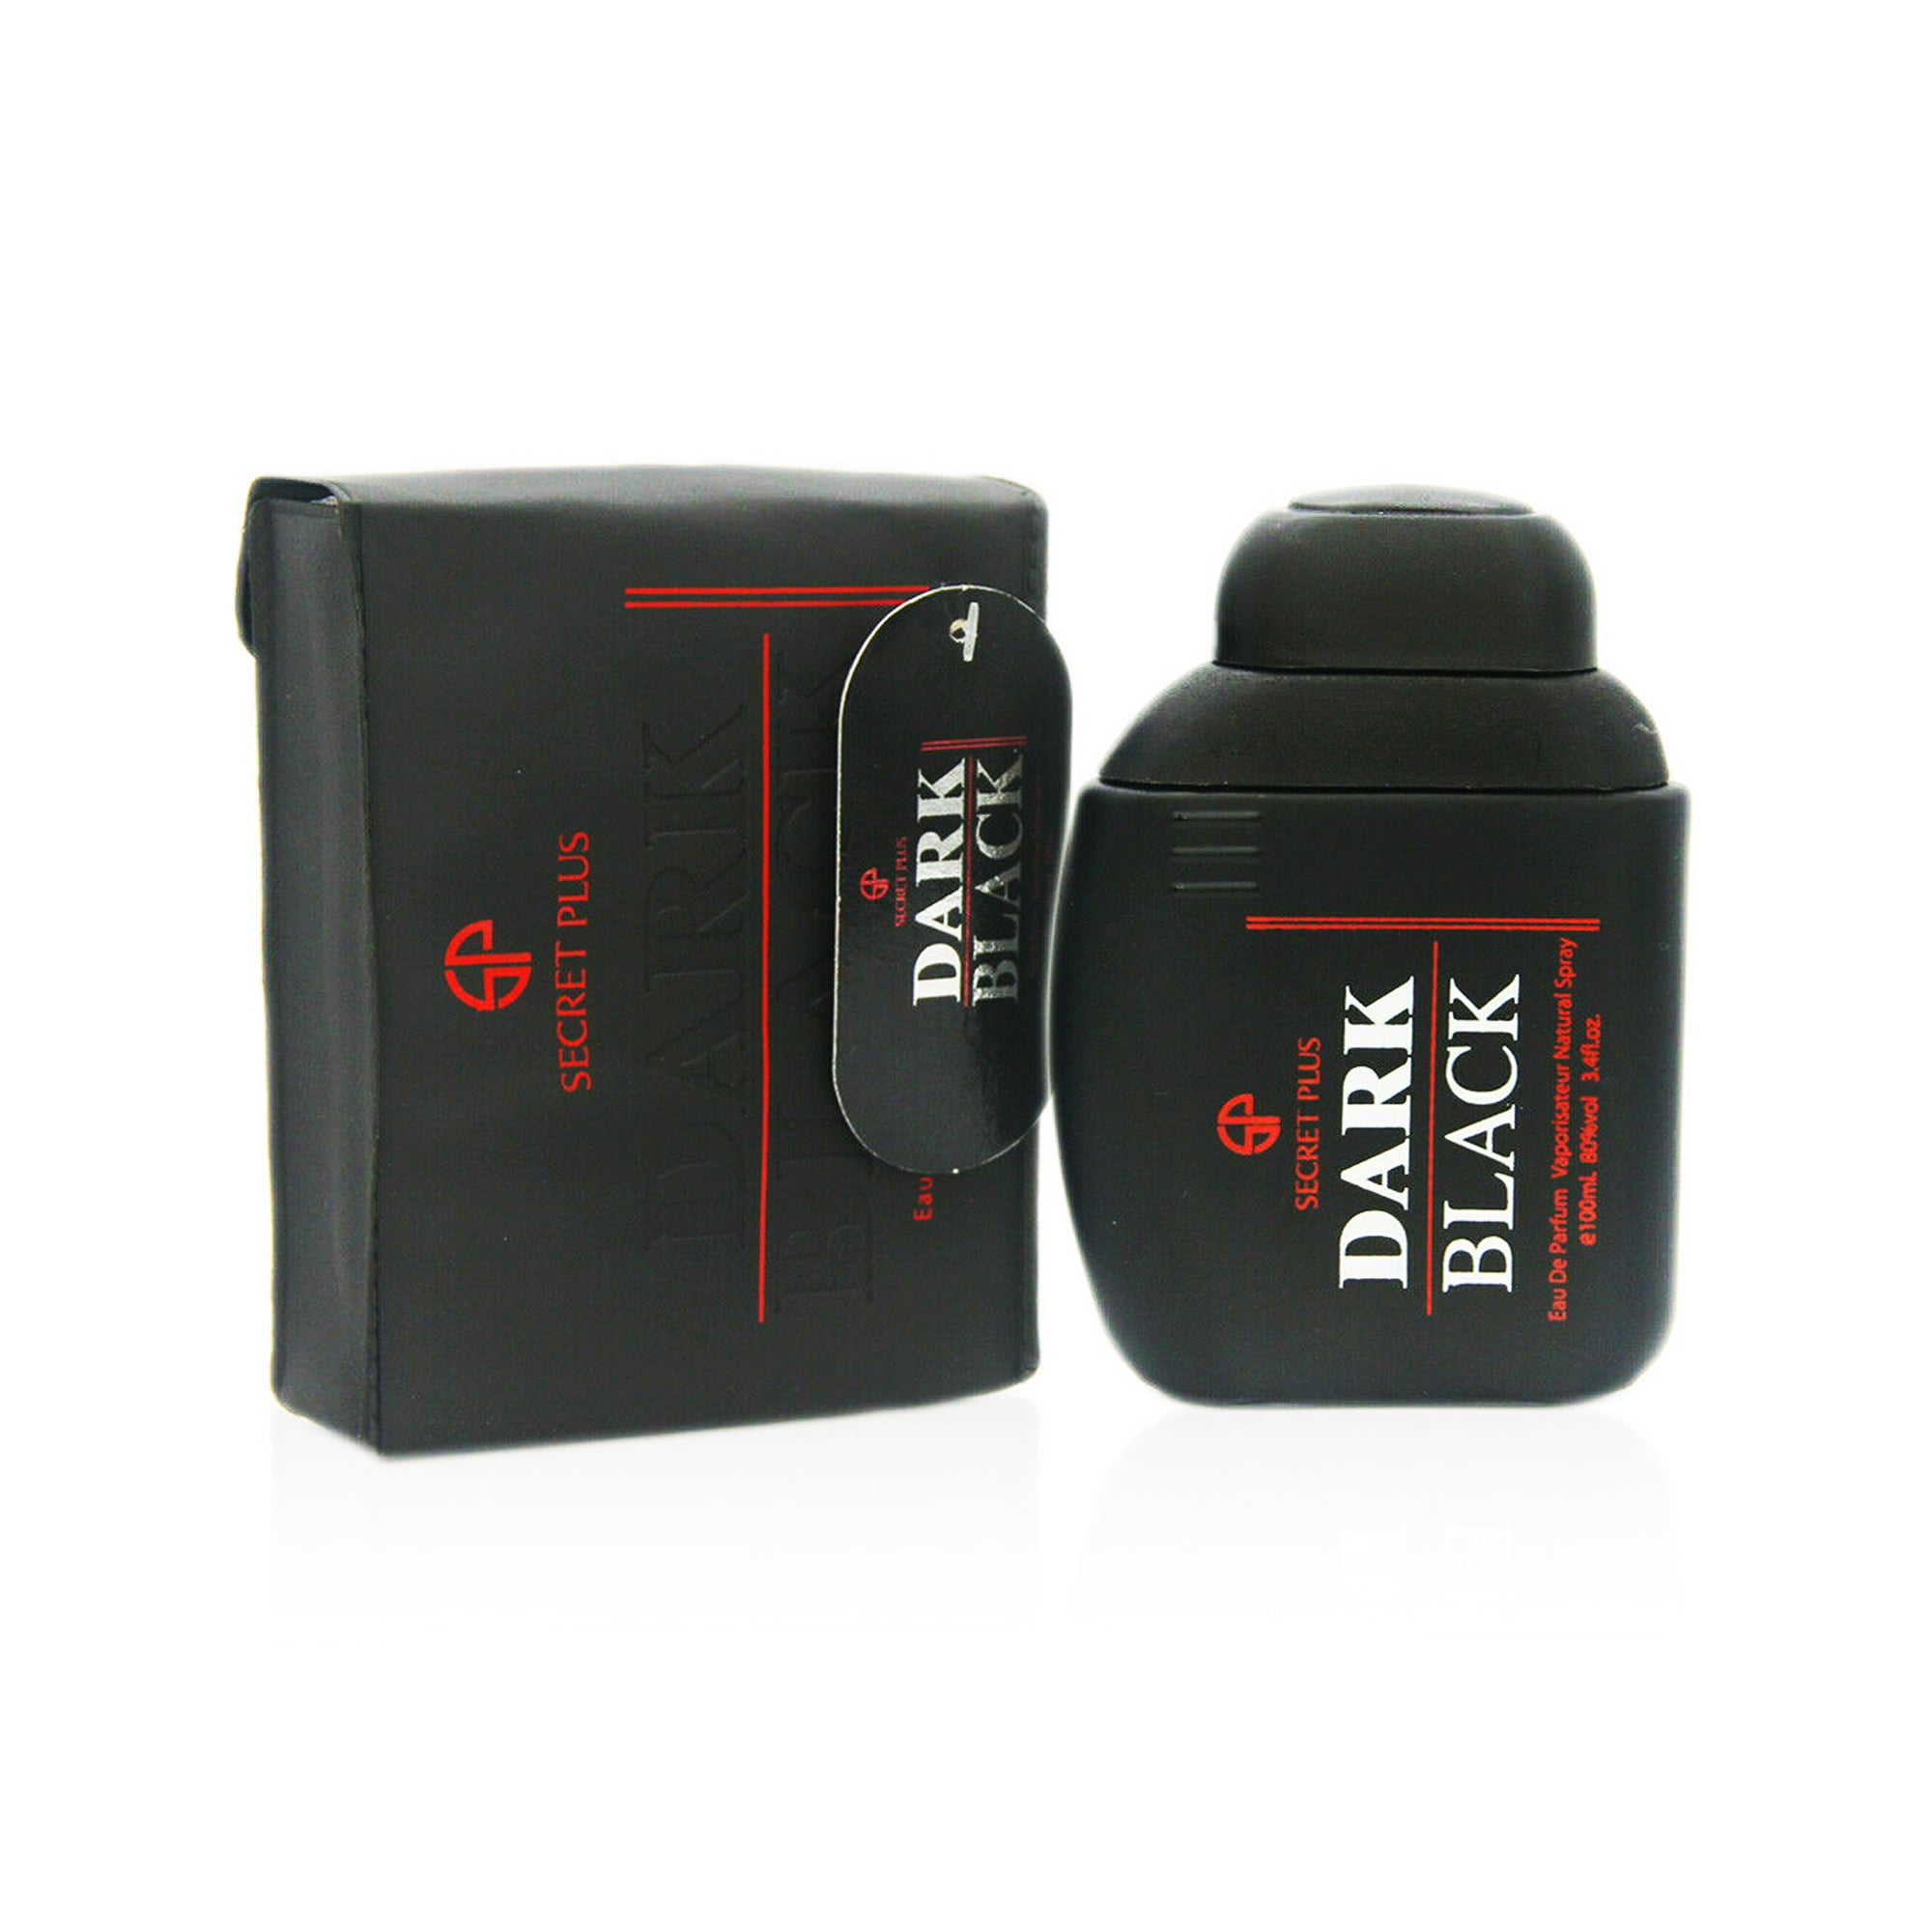  Black Extreme Perfume for Men : Beauty & Personal Care